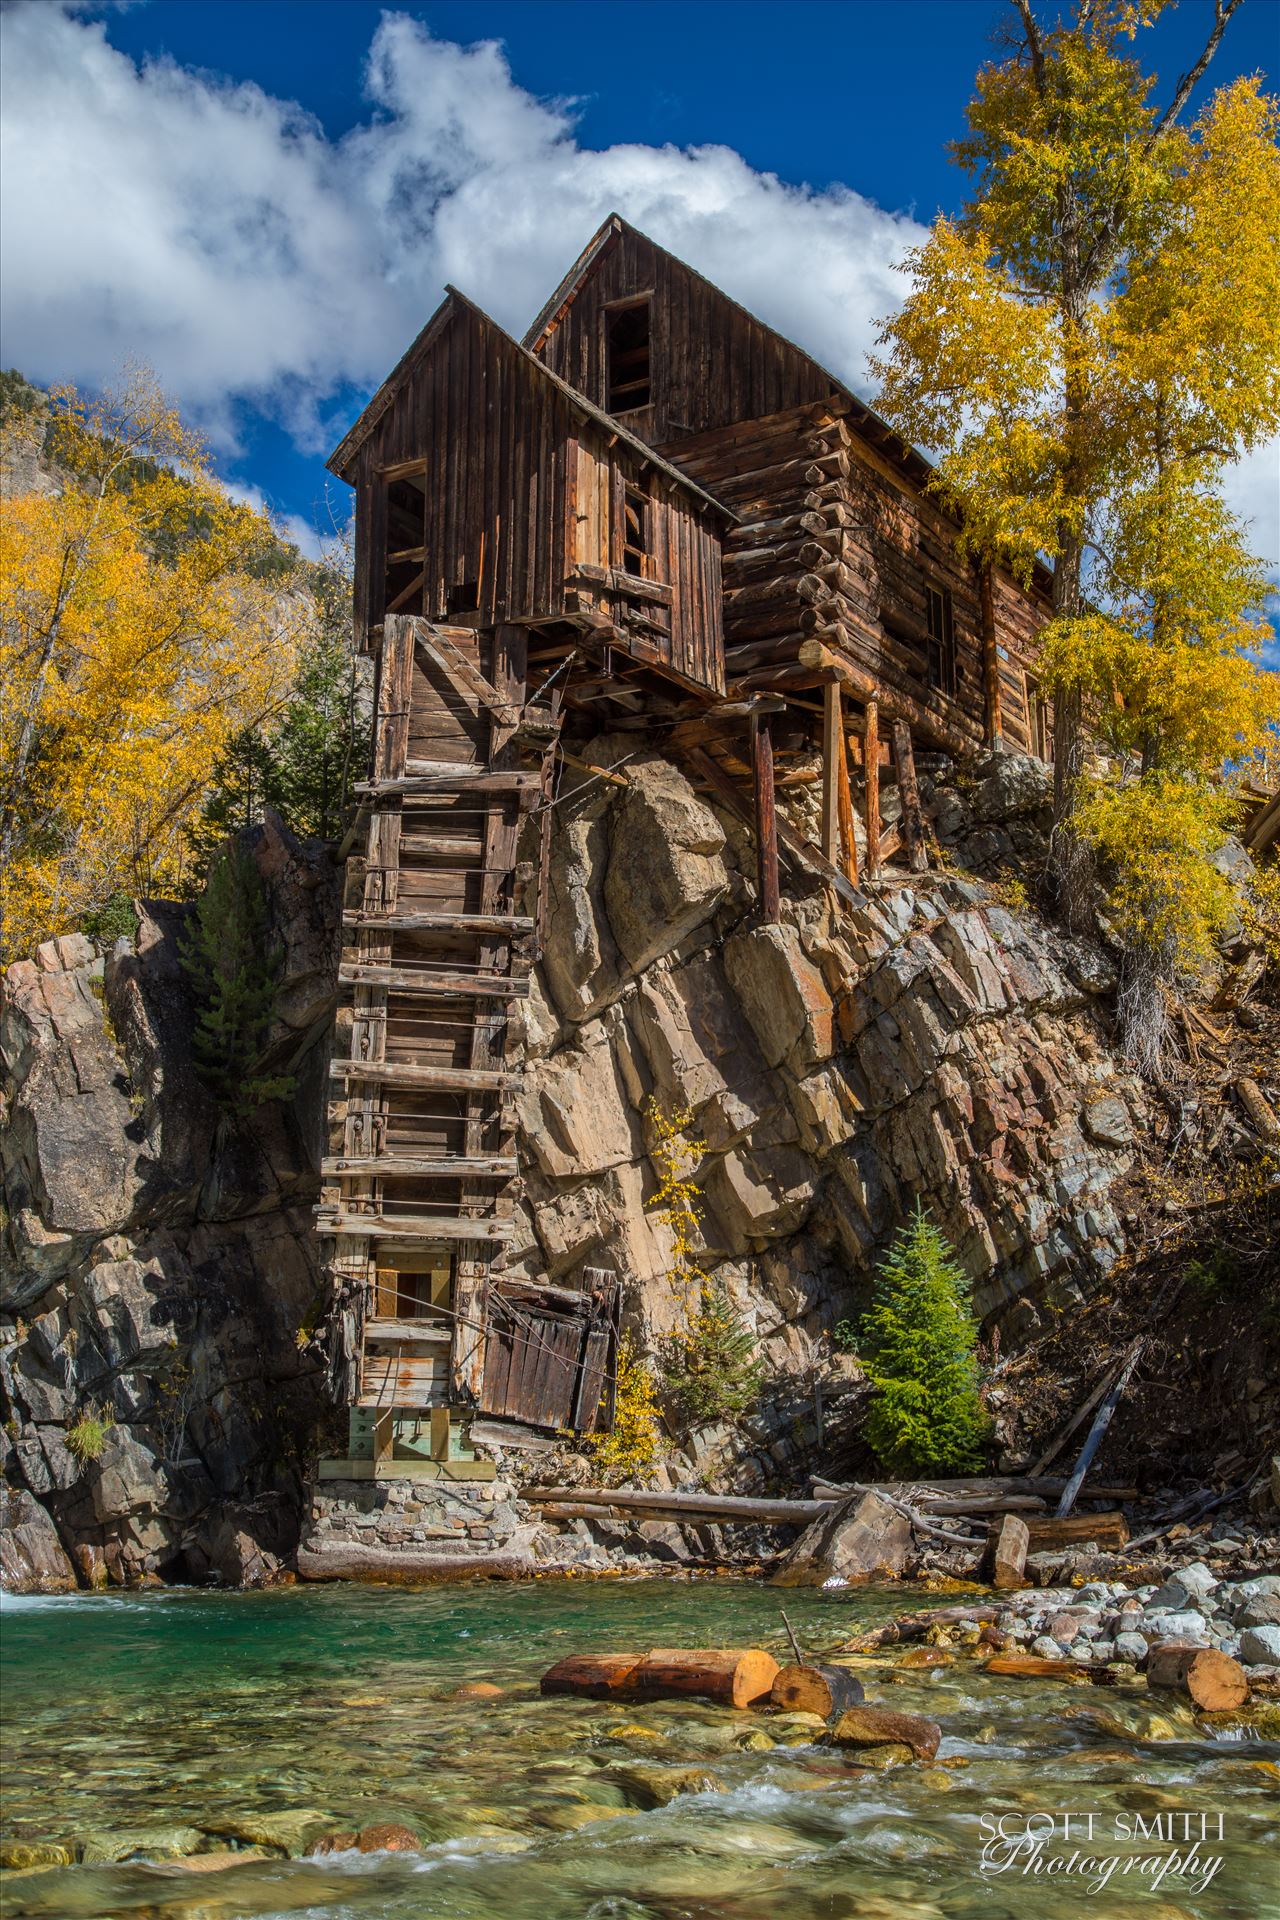 Crystal Mill, Colorado 14 The Crystal Mill, or the Old Mill is an 1892 wooden powerhouse located on an outcrop above the Crystal River in Crystal, Colorado by Scott Smith Photos